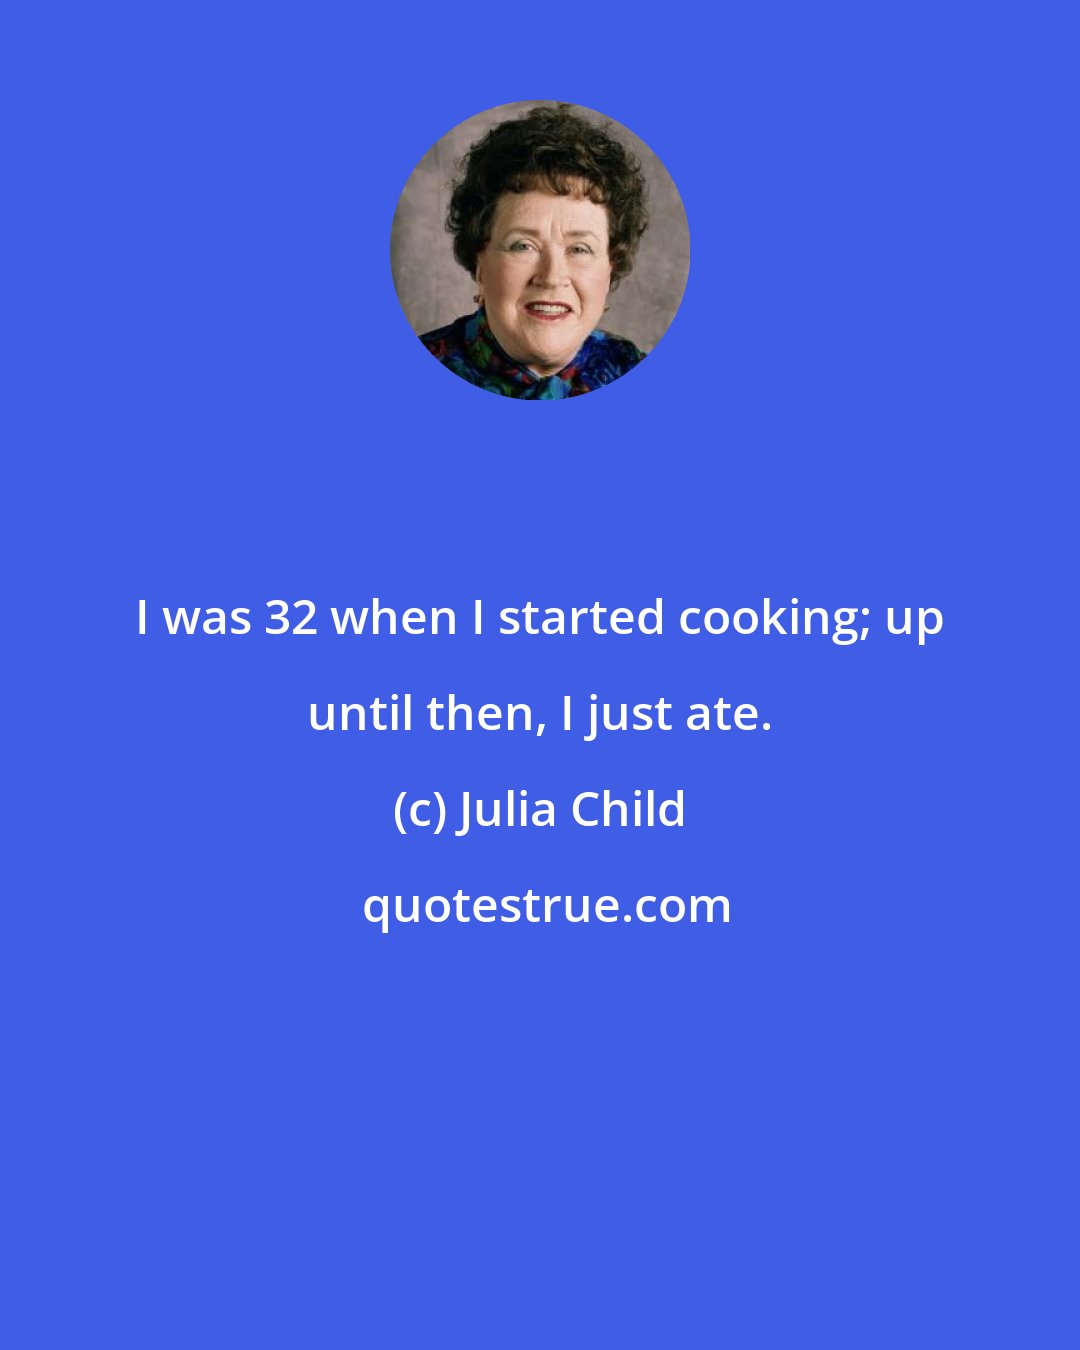 Julia Child: I was 32 when I started cooking; up until then, I just ate.